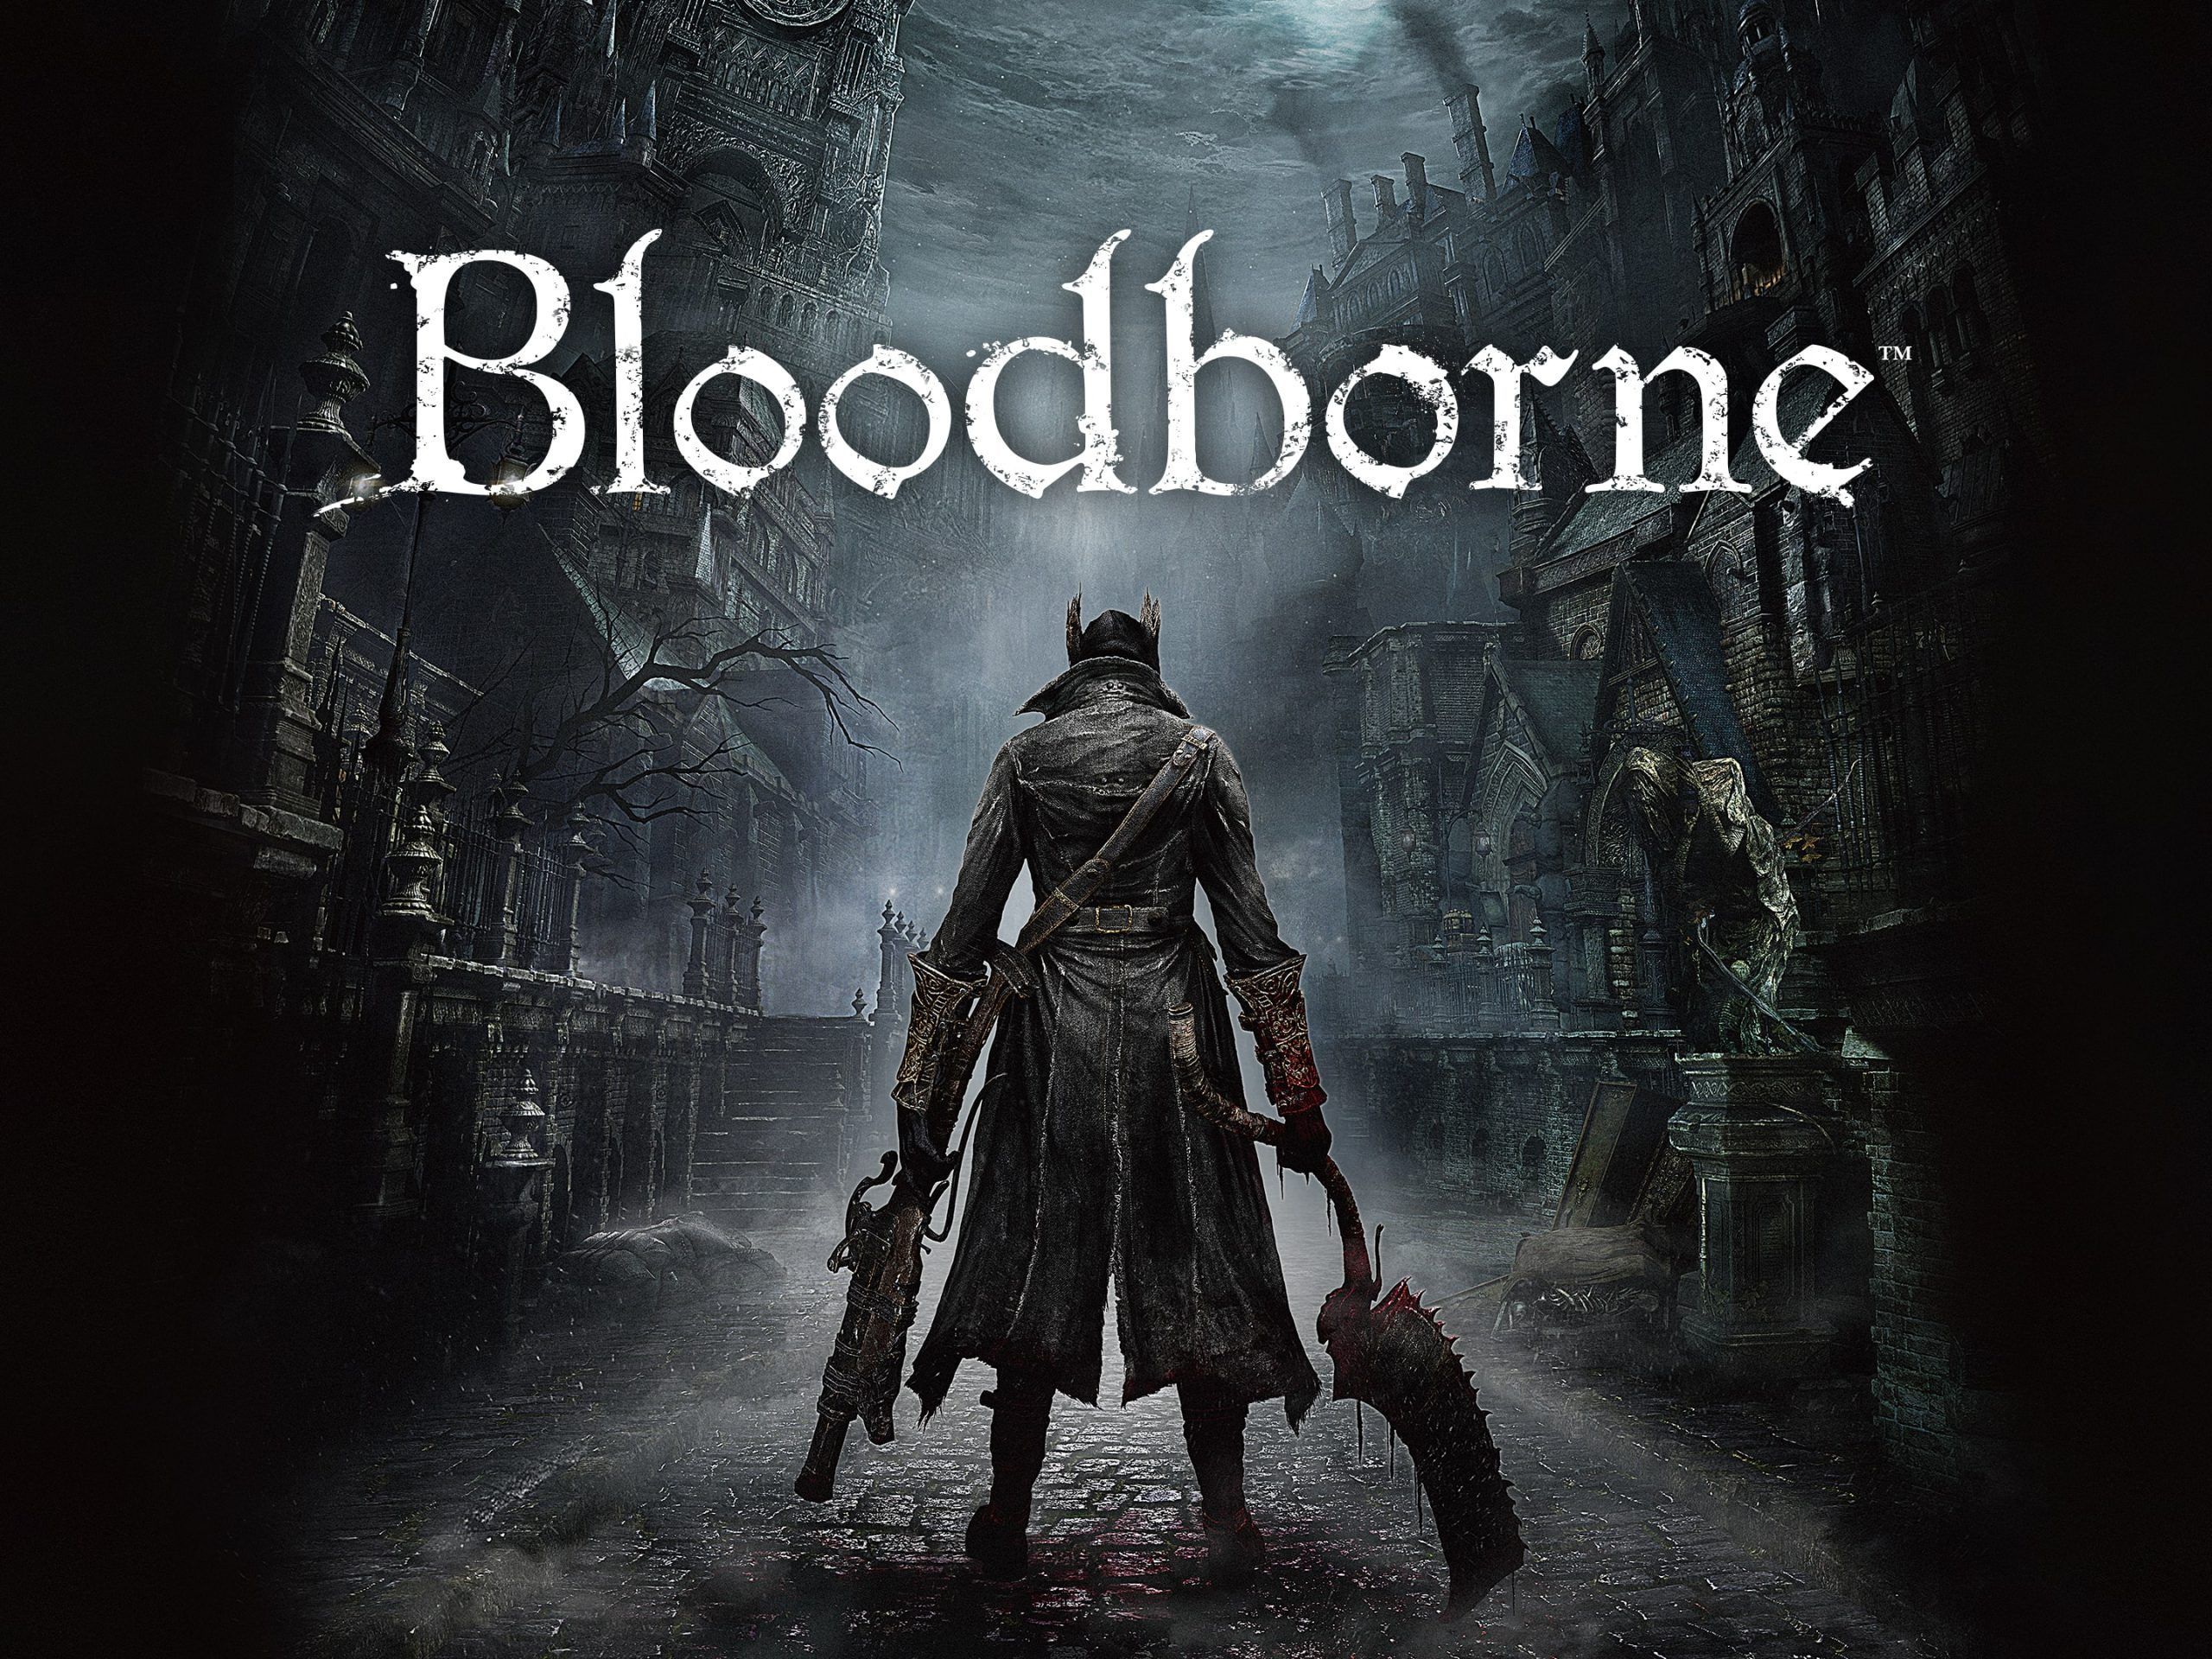 Game Wonder: On FromSoftware’s “Bloodborne” and H. P. Lovecraft’s “The Haunter of the Dark”